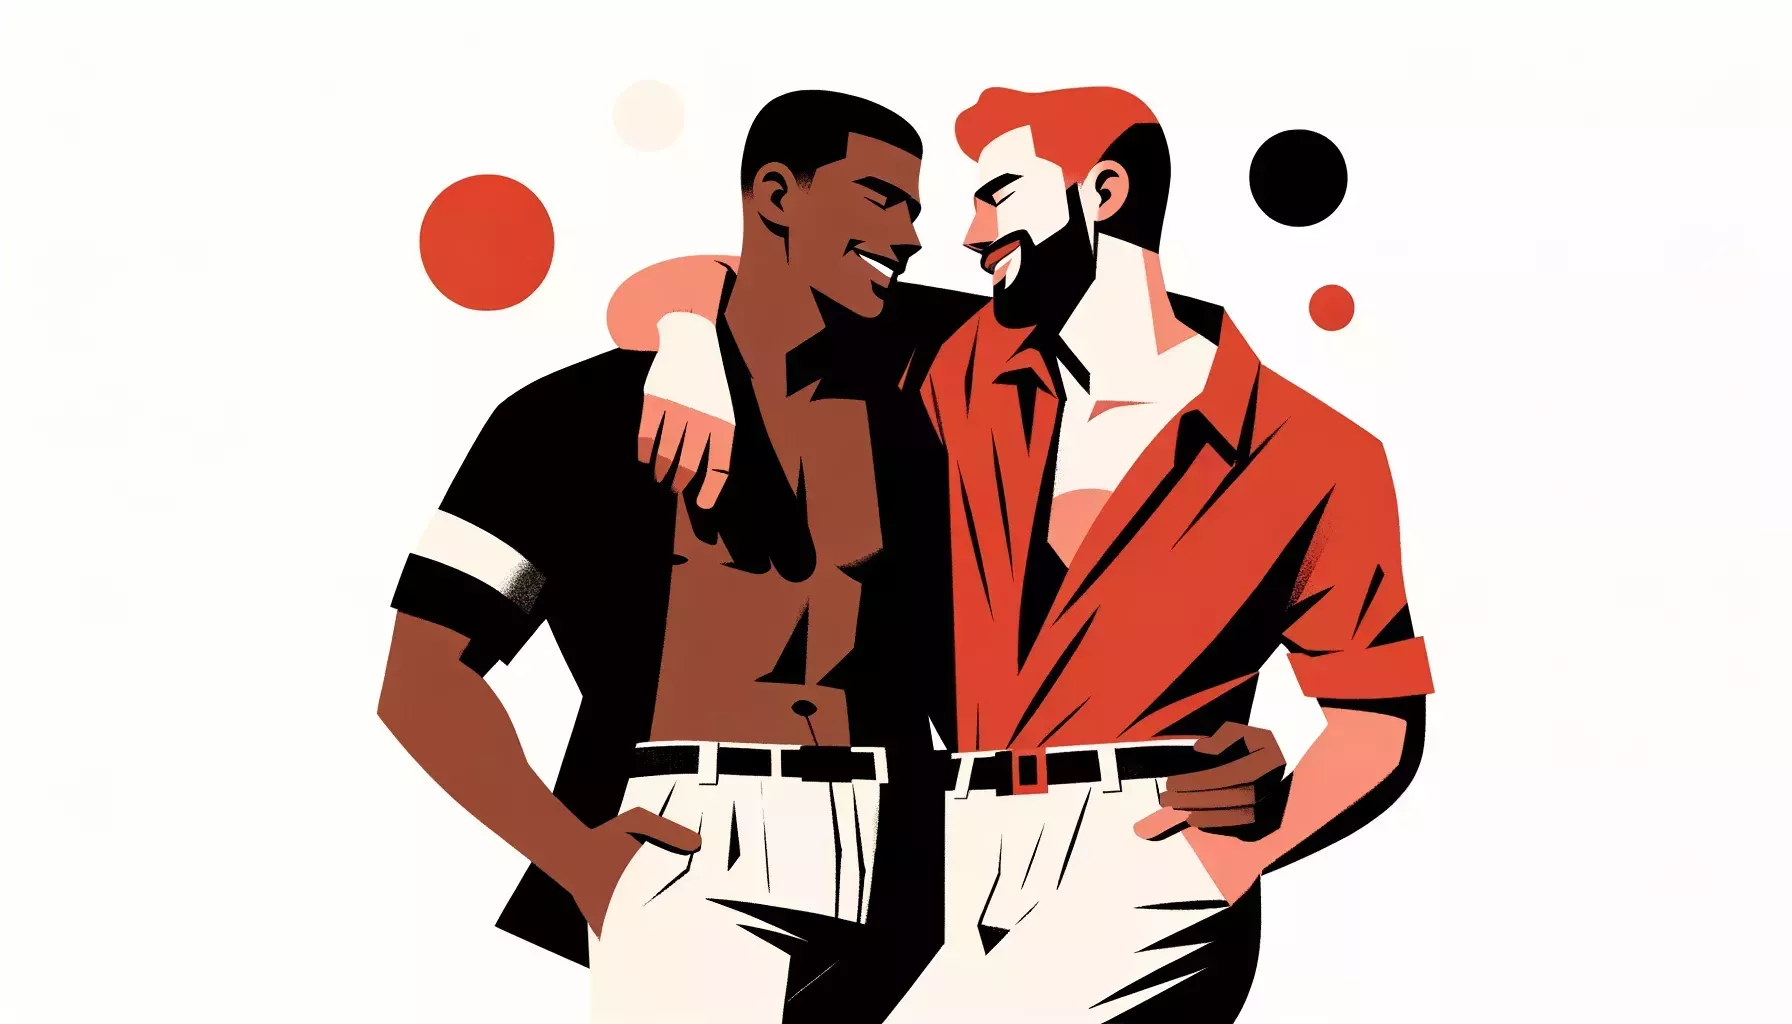 An illustration of a gay couple enjoying time together that conceptually represents gay date ideas and celebrates love within the LGBTQ+ community.